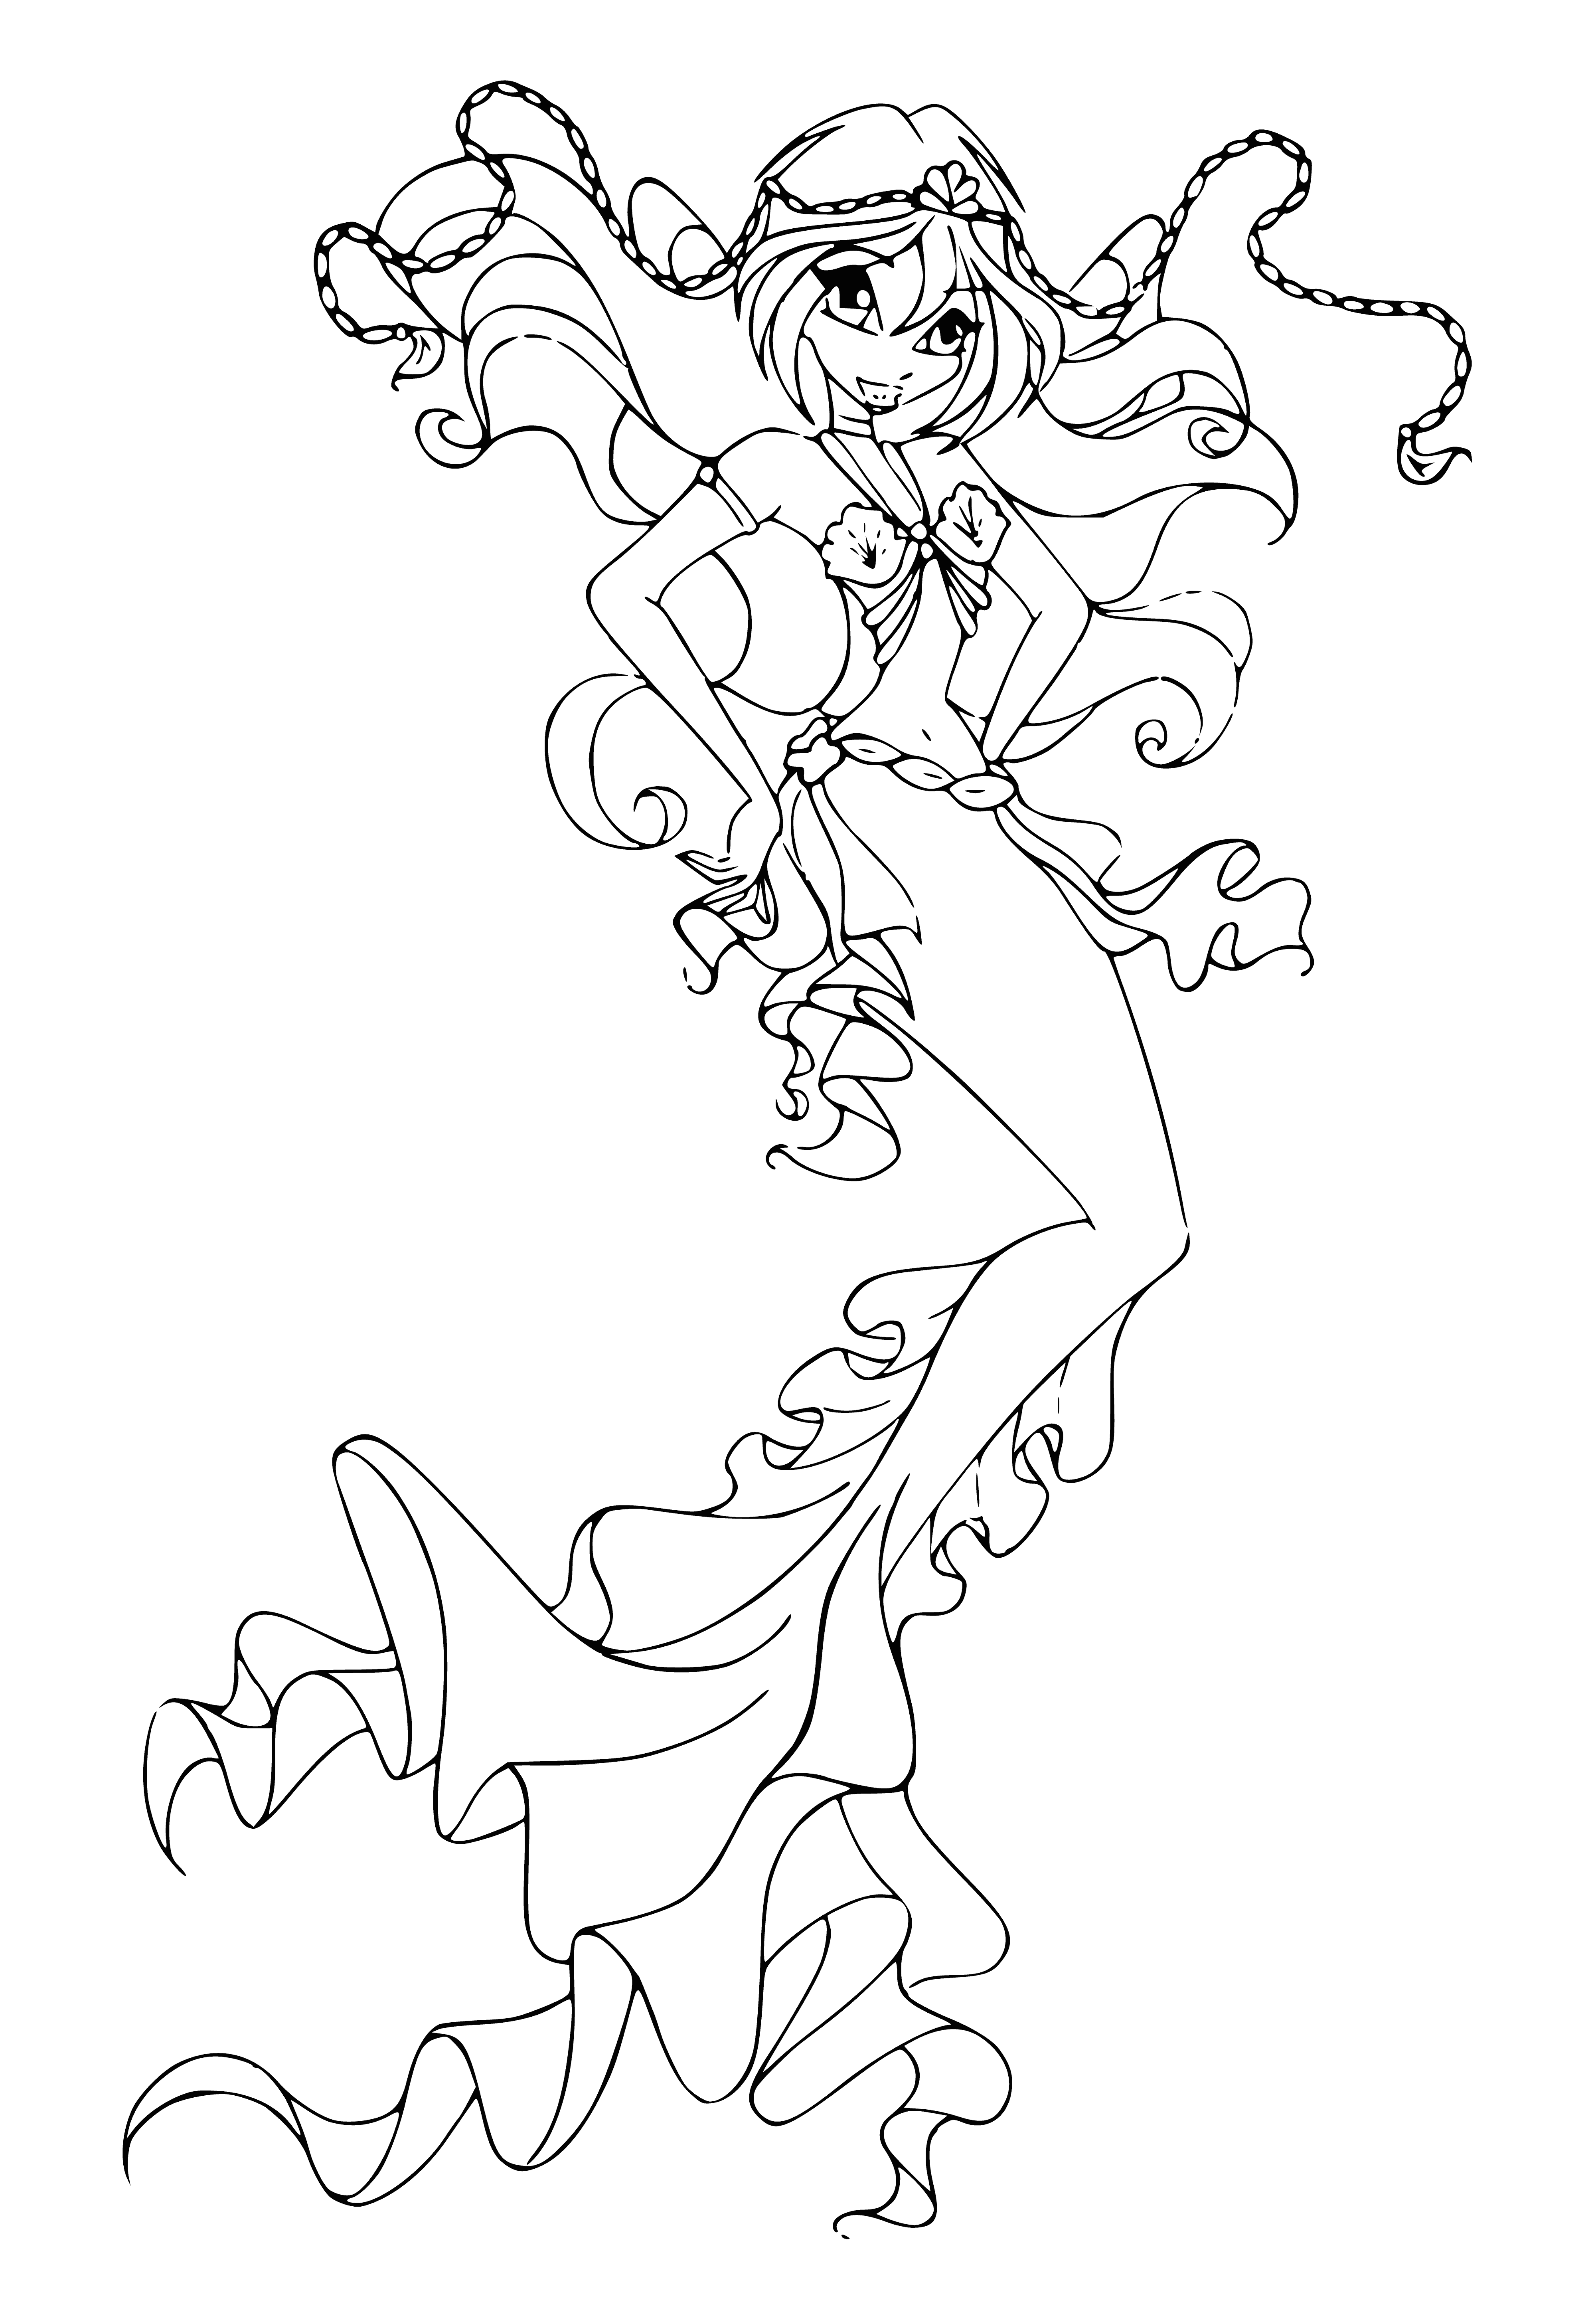 coloring page: #Mermaid

A mermaid holds a pink flower with a pink coral reef background #coloring